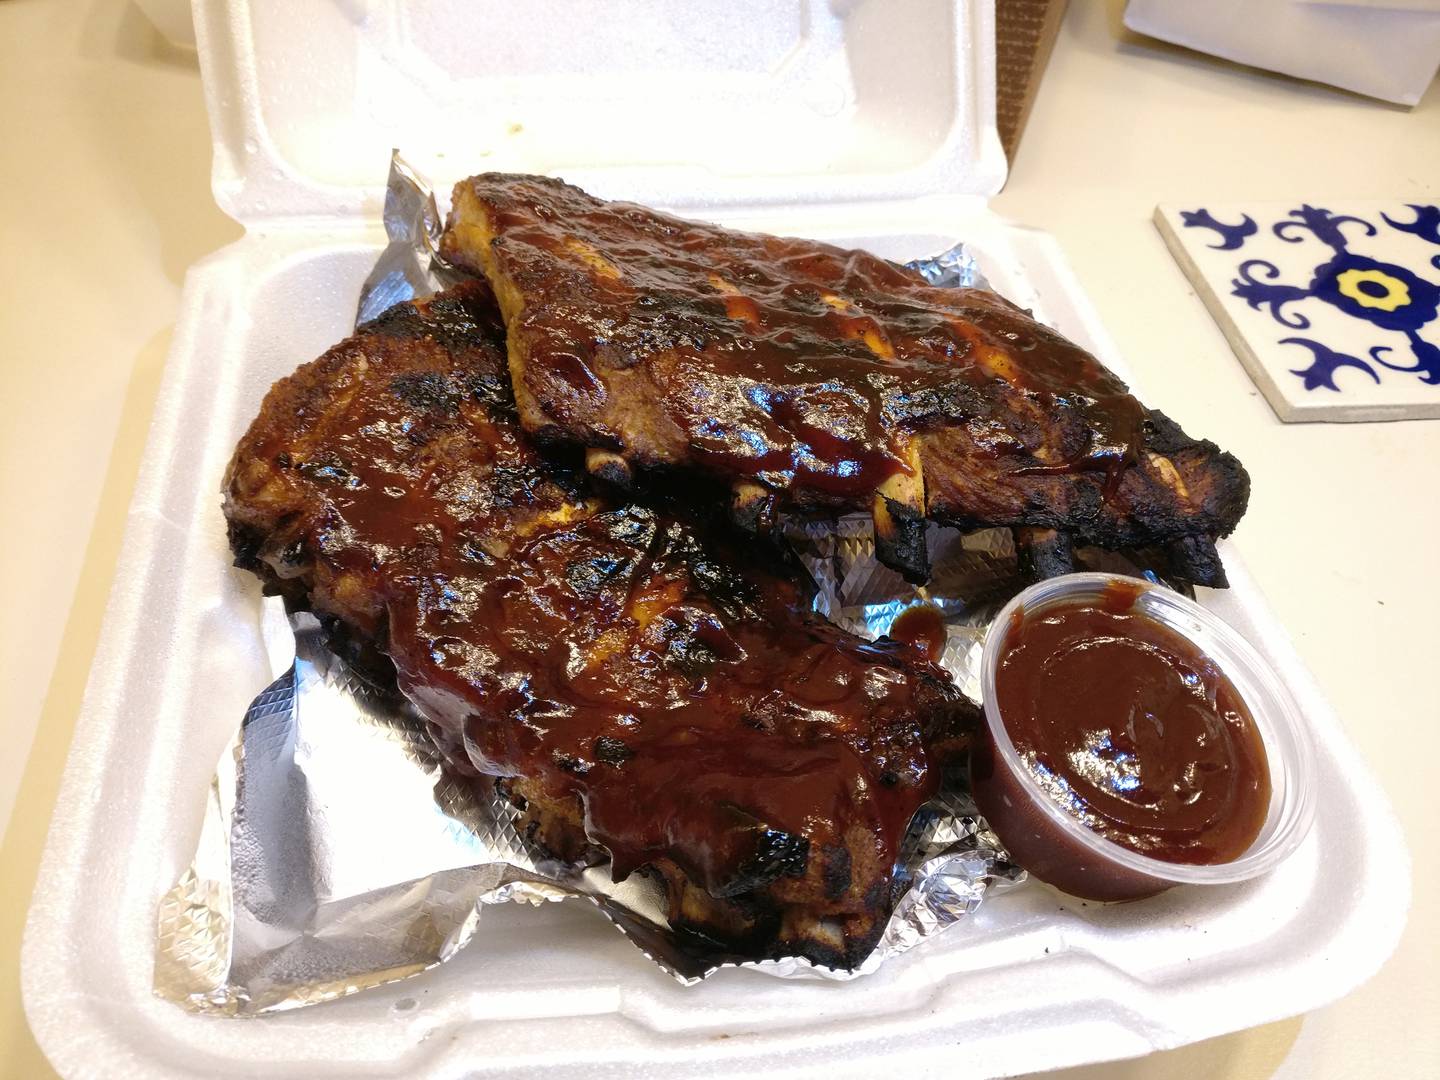 A full rack of the barbecue back ribs at Harner's Bakery & Restaurant in North Aurora.